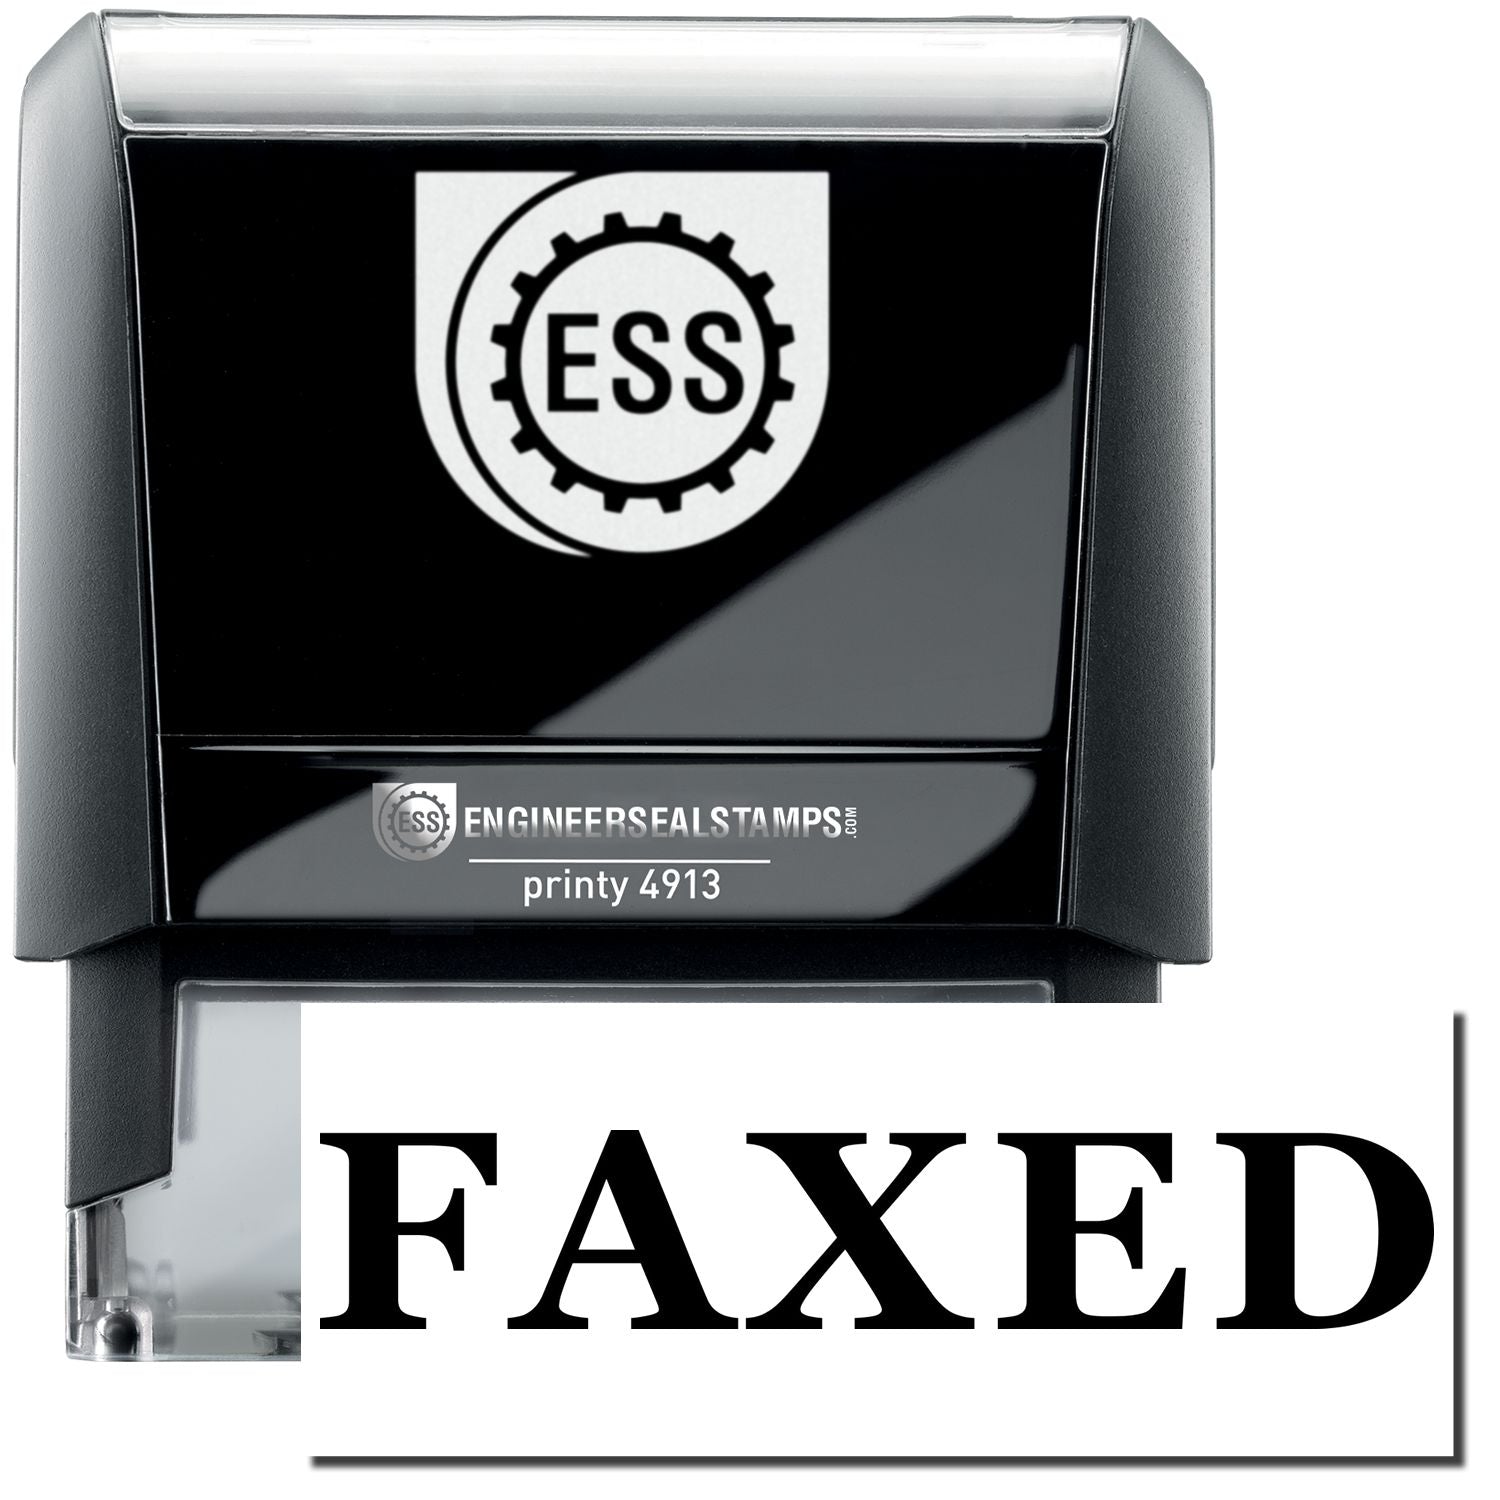 A self-inking stamp with a stamped image showing how the text "FAXED" in a large bold font is displayed by it after stamping.